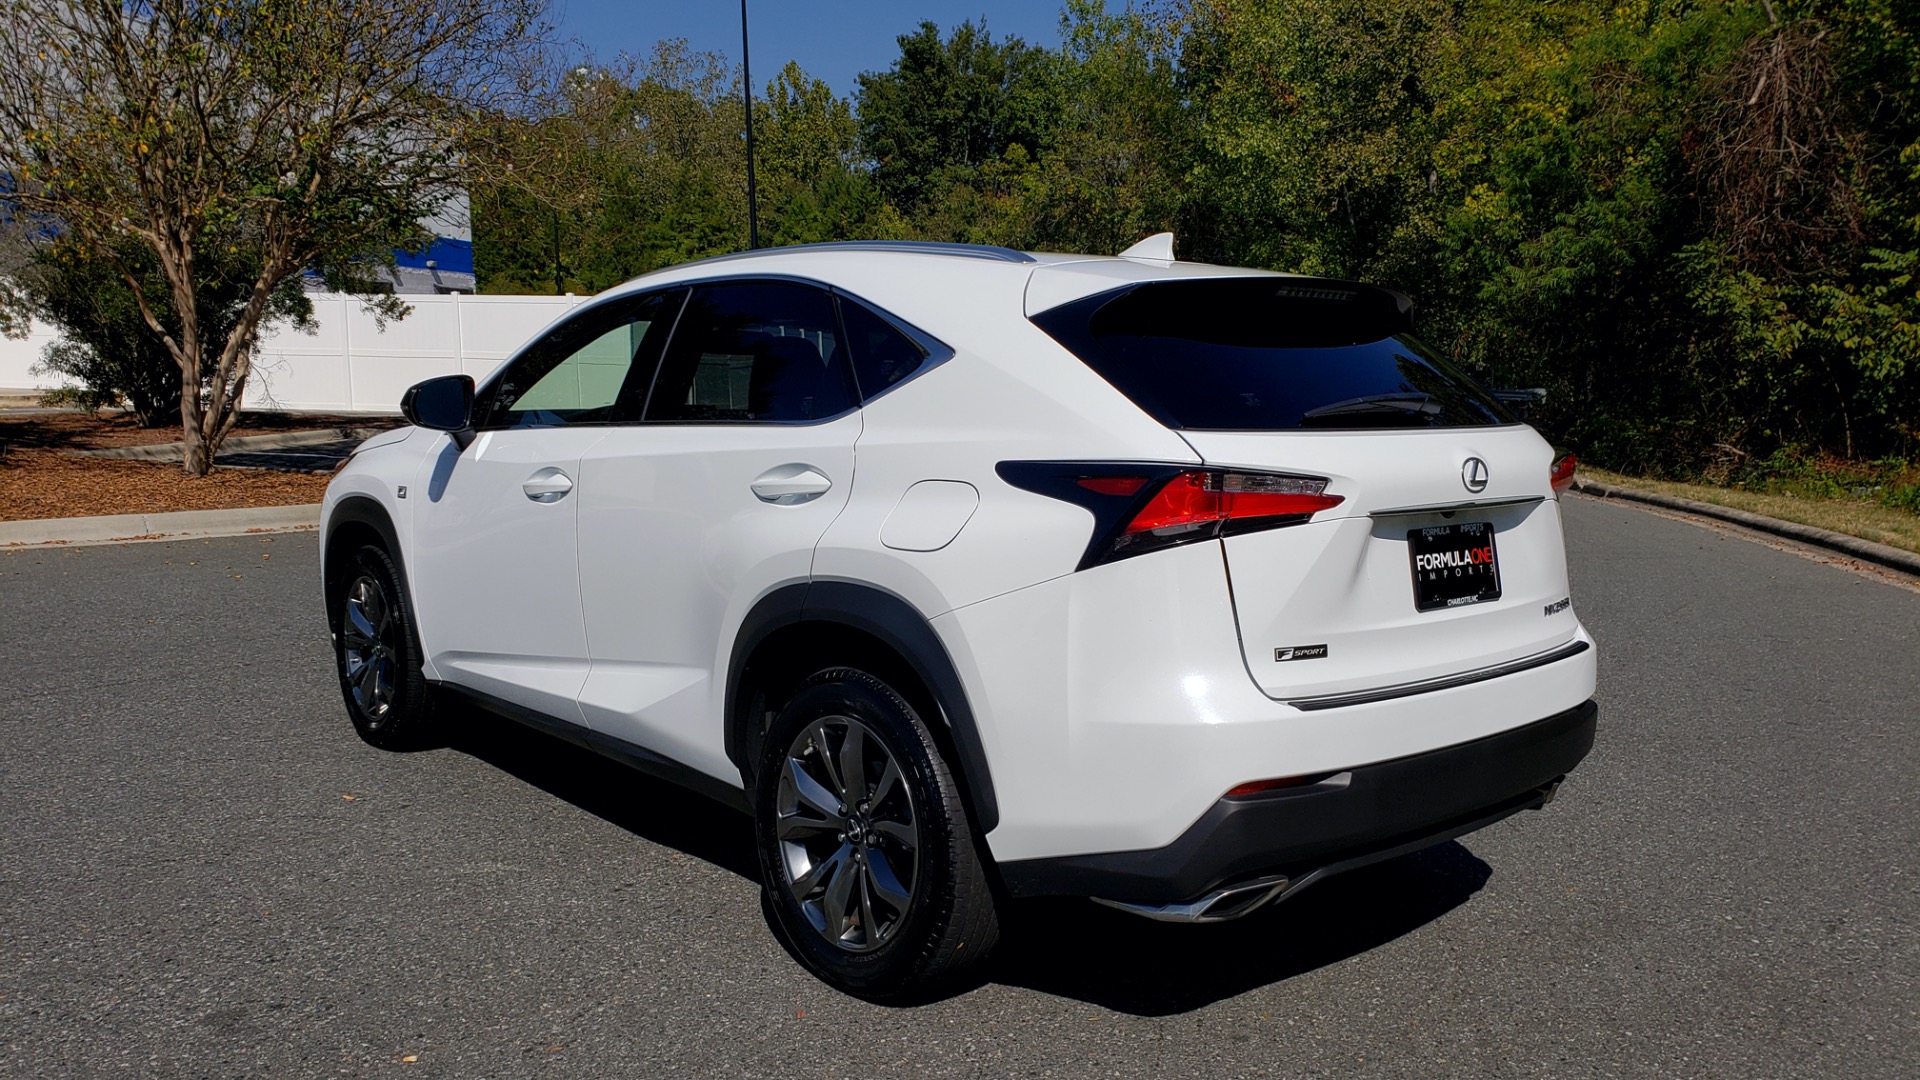 Used 2016 Lexus NX 200t F-SPORT / BACK-UP CAMERA / 18 INCH WHEELS for sale Sold at Formula Imports in Charlotte NC 28227 3